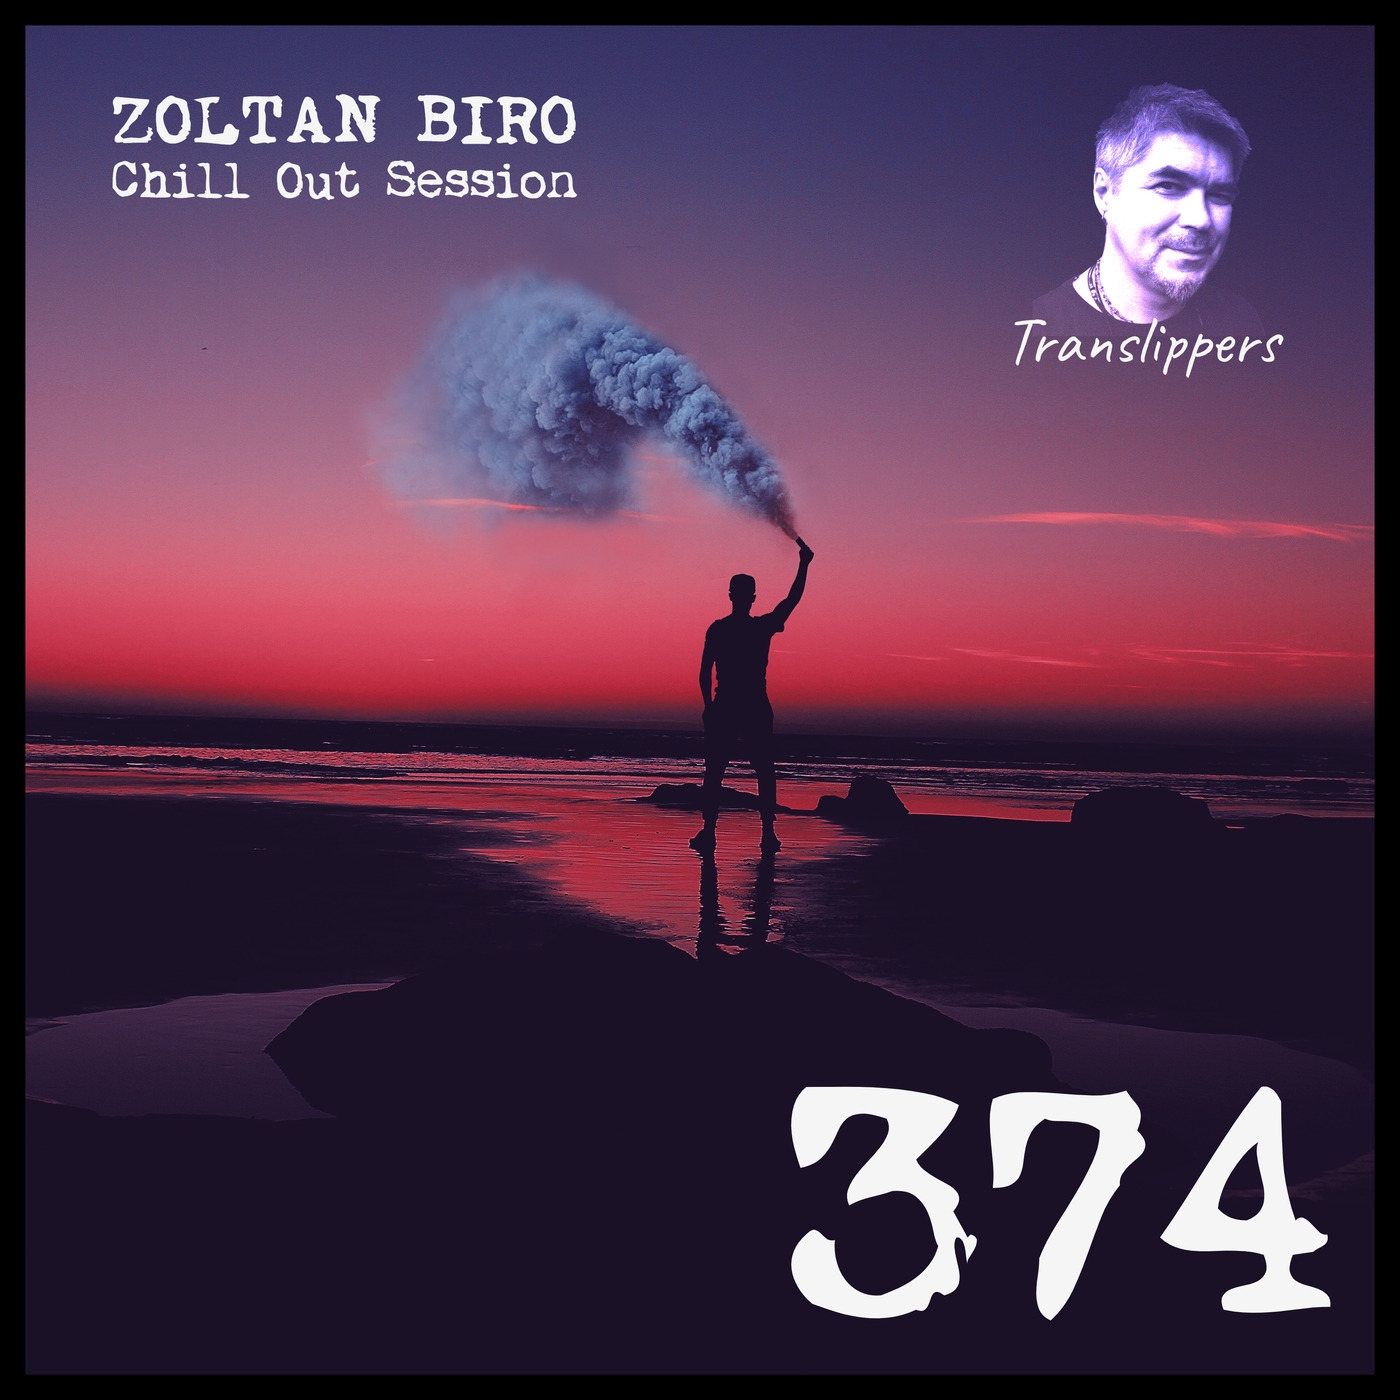 Zoltan Biro - Chill Out Session 374 [including: Translippers Special Mix]